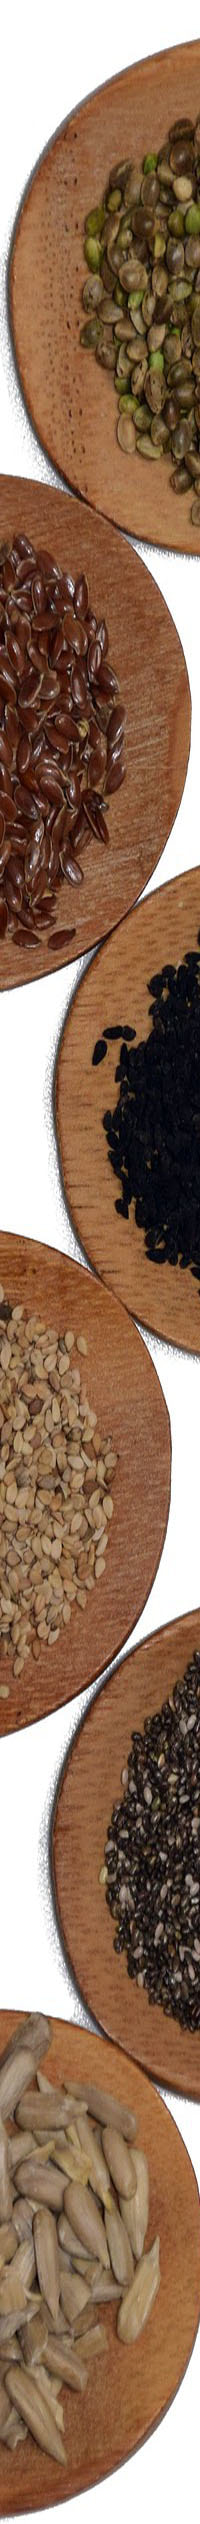 Dietary Seeds Picture